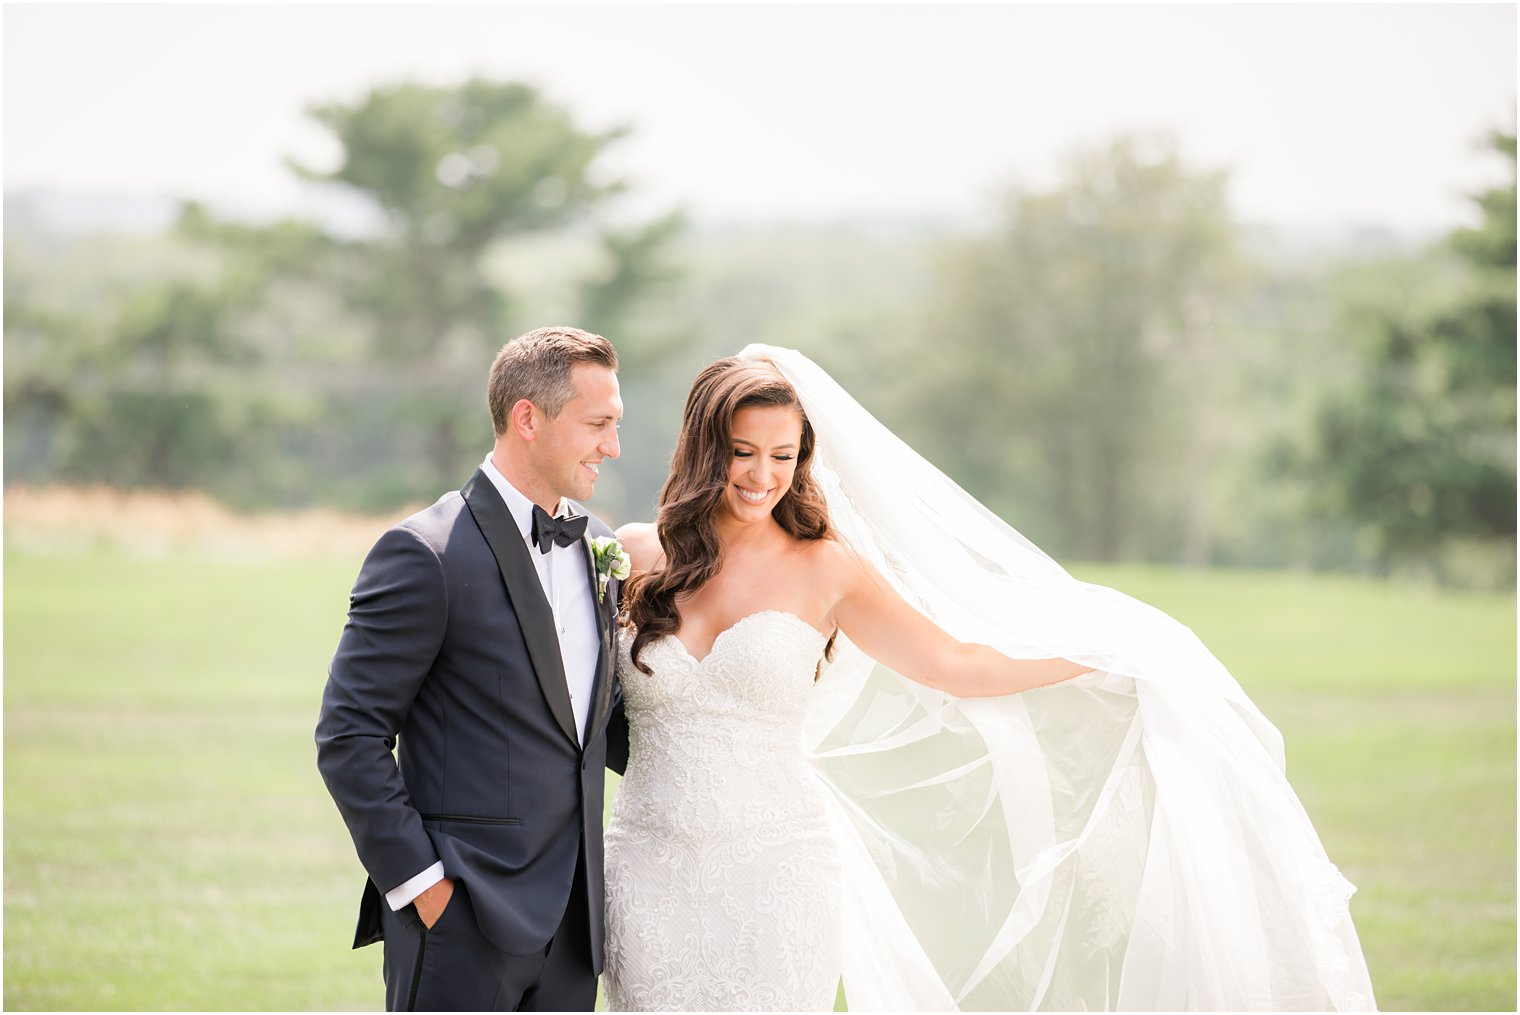 newlyweds laugh while bride lifts veil during wedding photos at Navesink Country Club